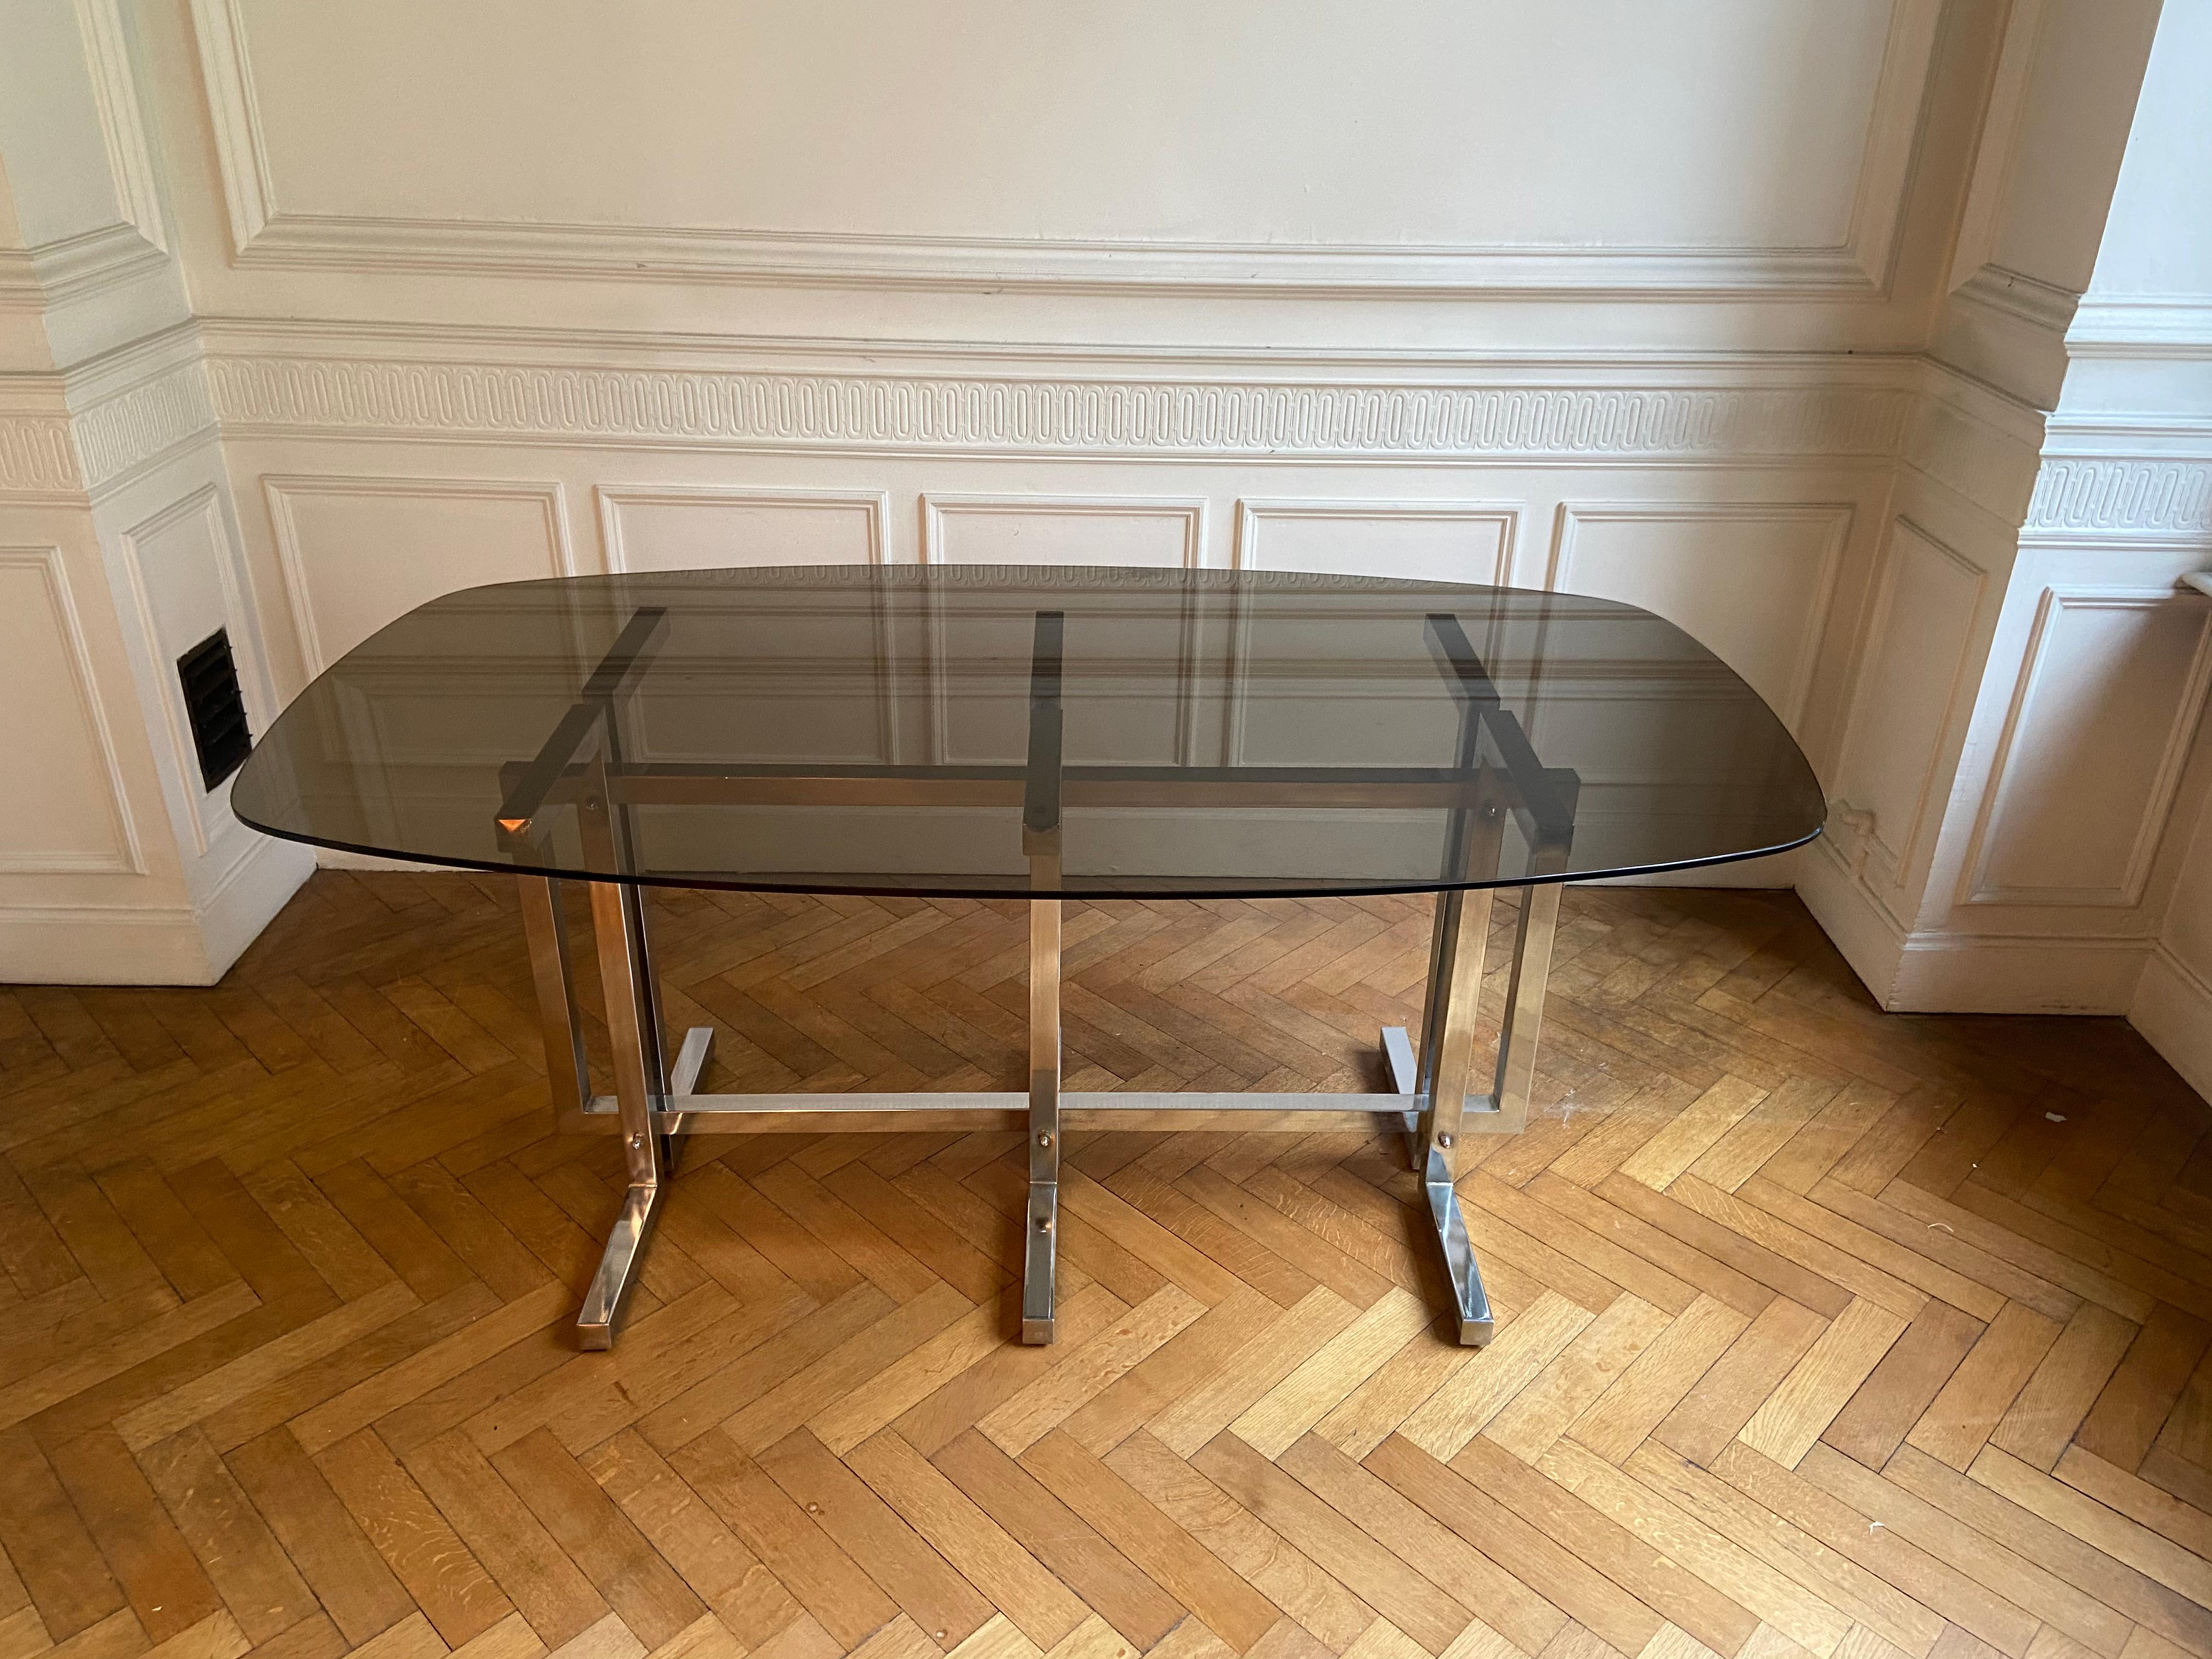 European Vintage dining table. Graphic feet in chrome metal. Smoked glass top.